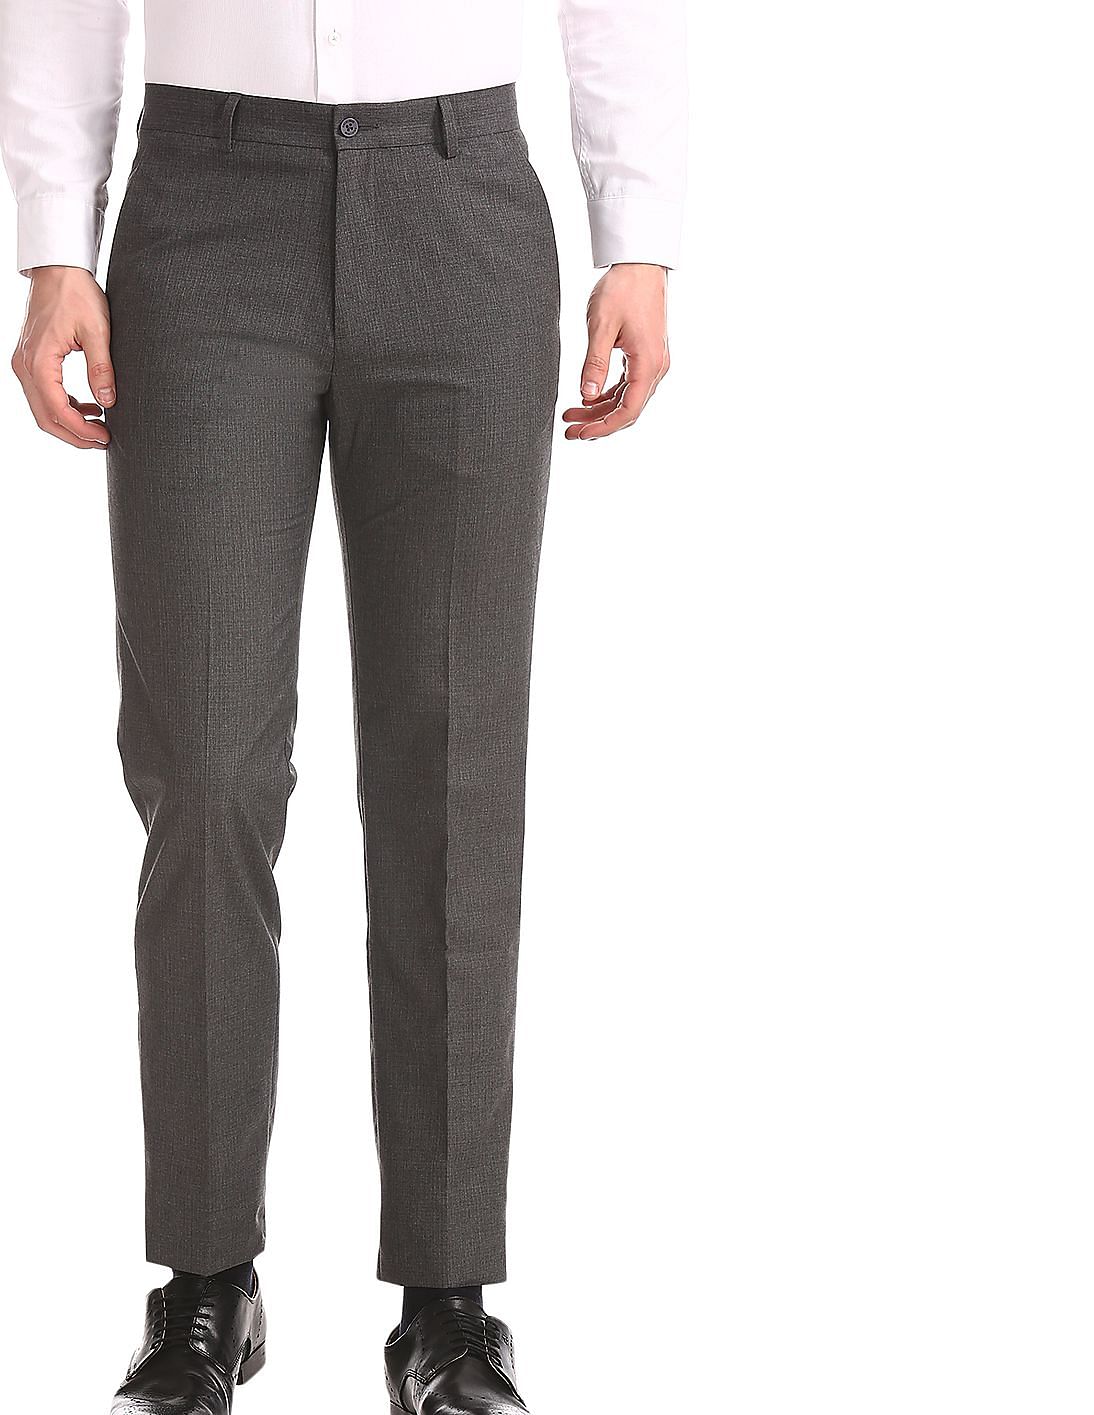 WHOLESALE ONLY 100 ORIGINAL EXCALIBUR Mens Formal Pants With Mrp Tags   Brand Mentioned Bill  Clothing in Ludhiana 178203200  Clickindia